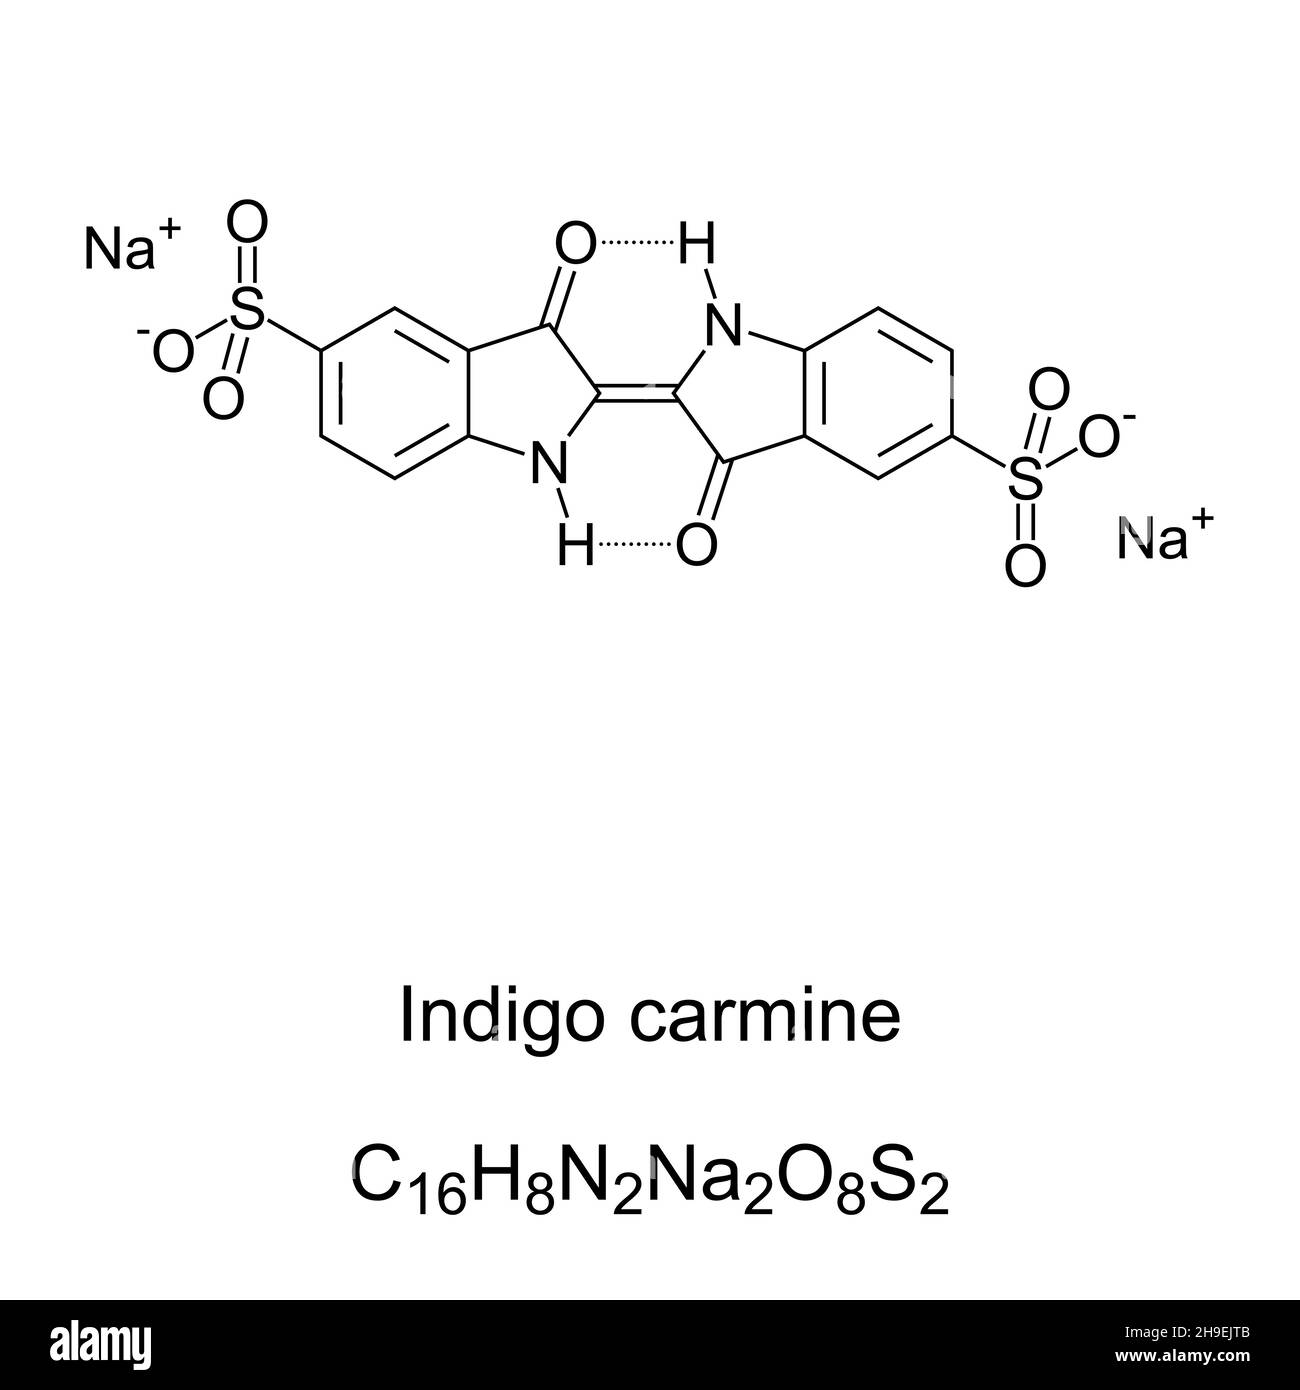 Indigo carmine, chemical formula and structure. Organic salt derived from indigo by aromatic sulfonation, which renders the compound soluble in water. Stock Photo